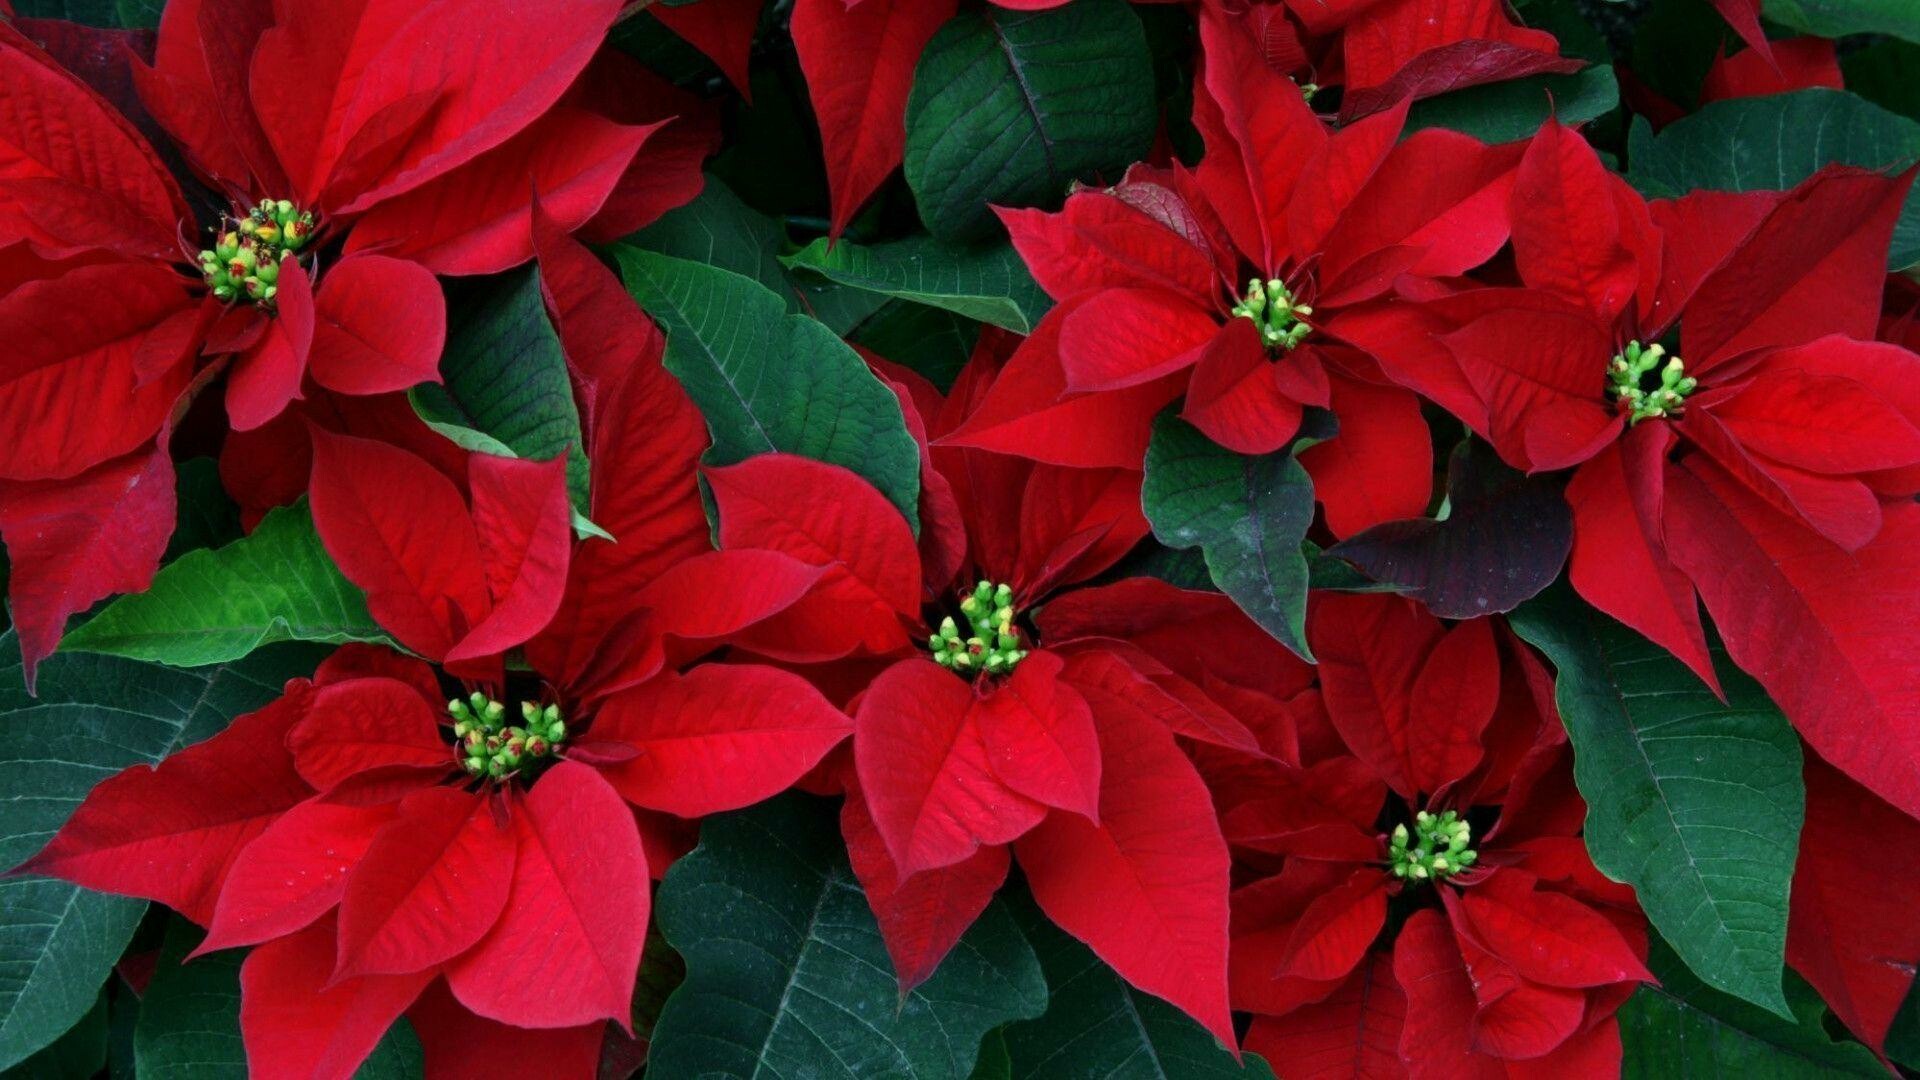 Poinsettia: Has also been called the lobster flower and the flame-leaf flower, due to the red color. 1920x1080 Full HD Background.